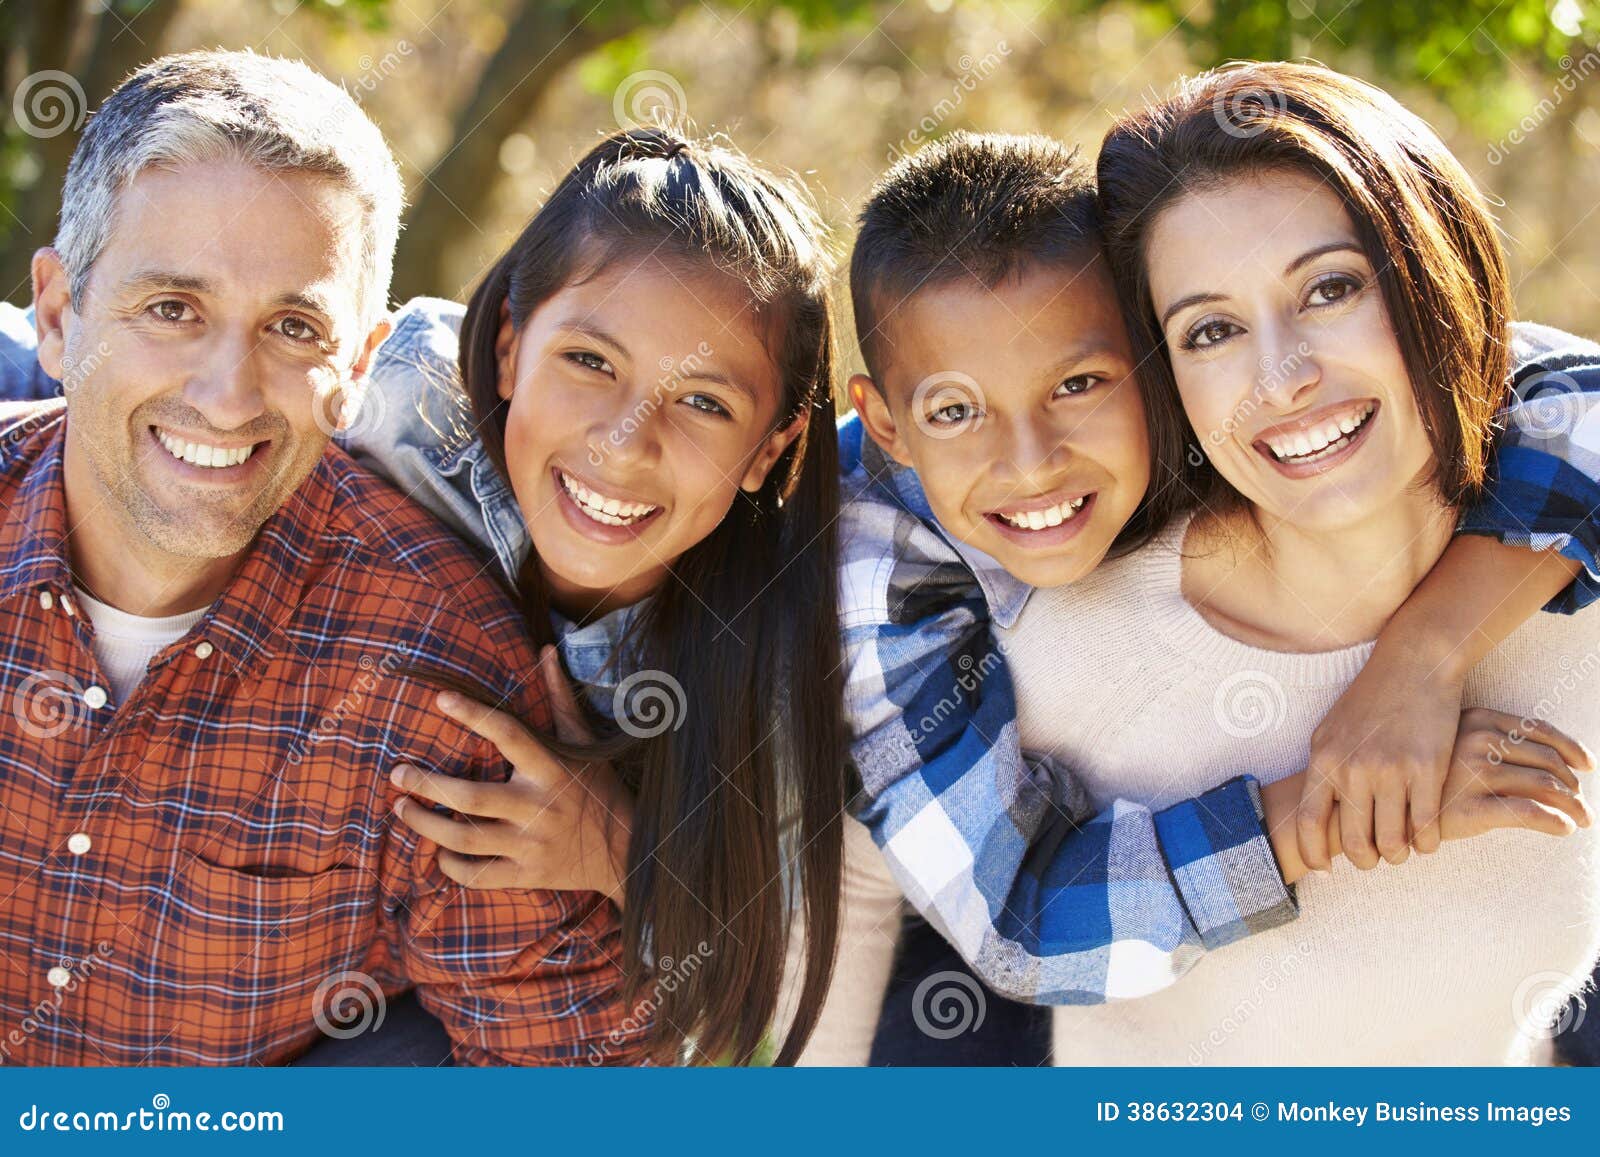 portrait of hispanic family in countryside